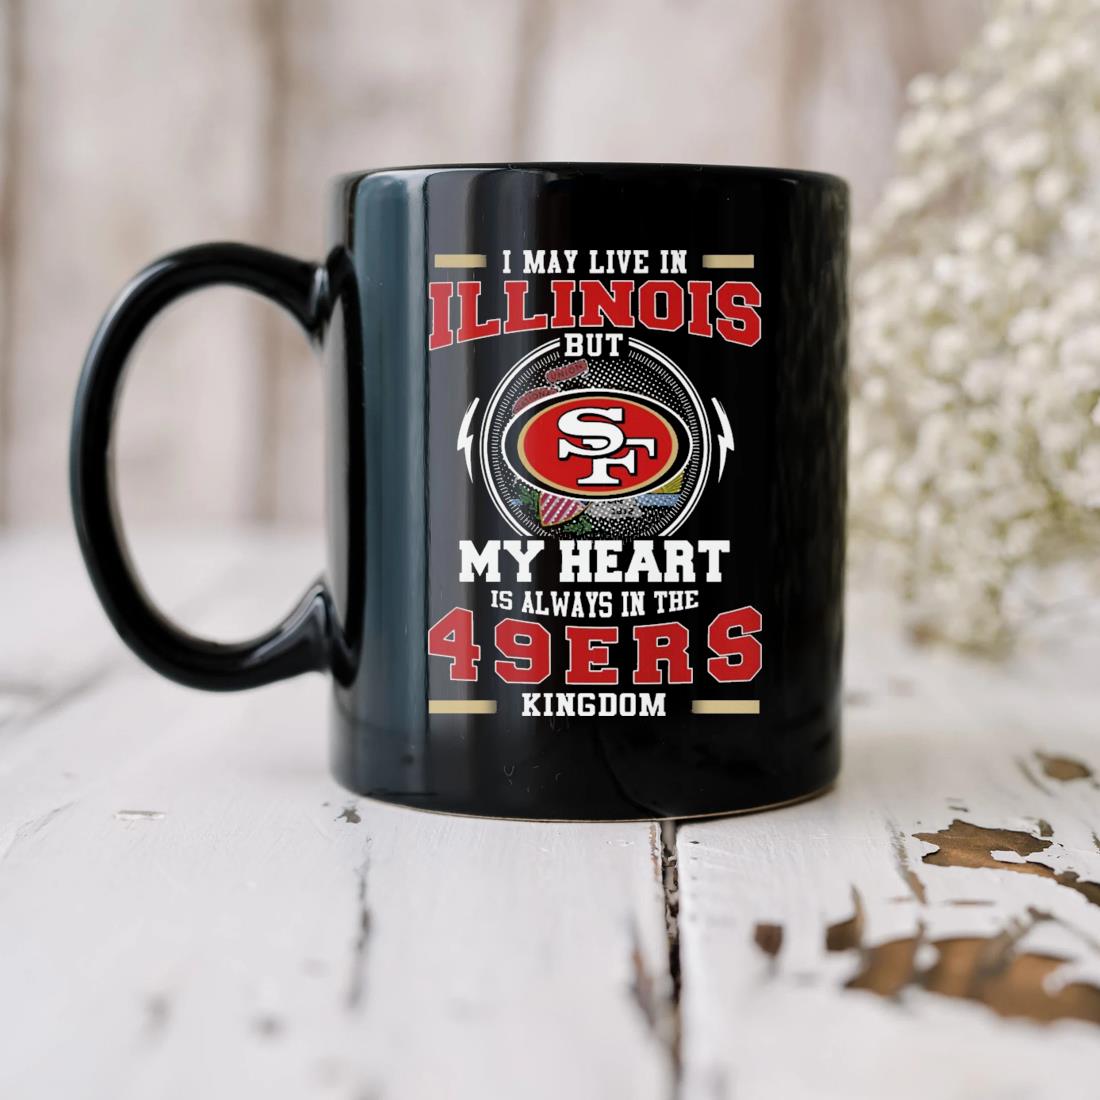 I May Live In Illinois But My Heart Is Always In The 49ers Kingdom Mug